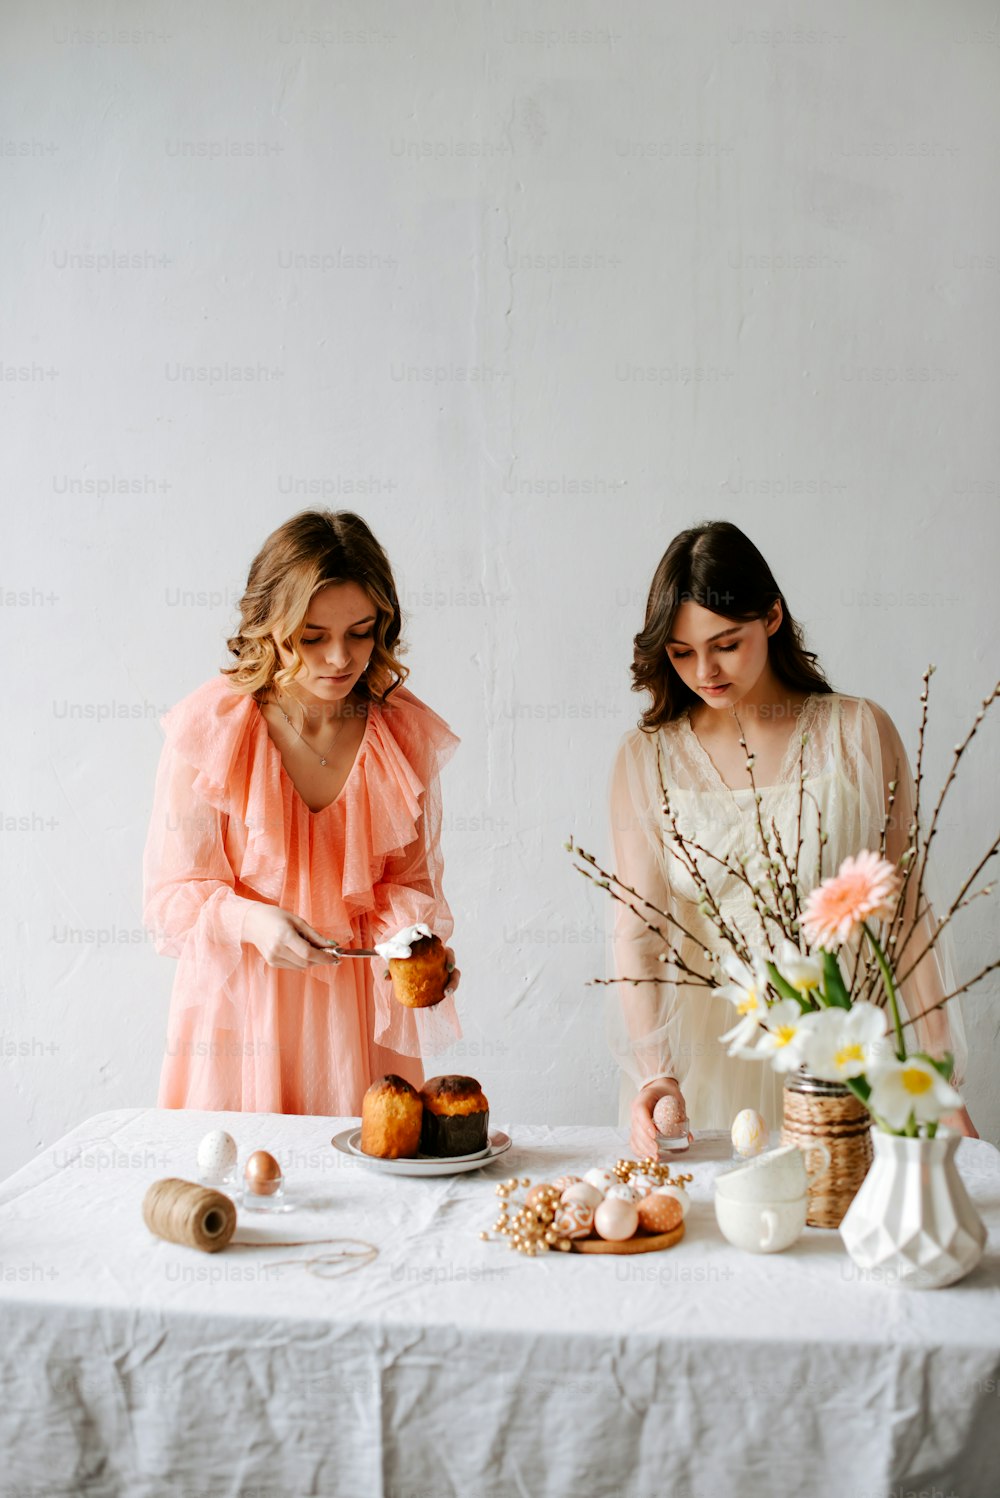 two women standing at a table cutting a cake